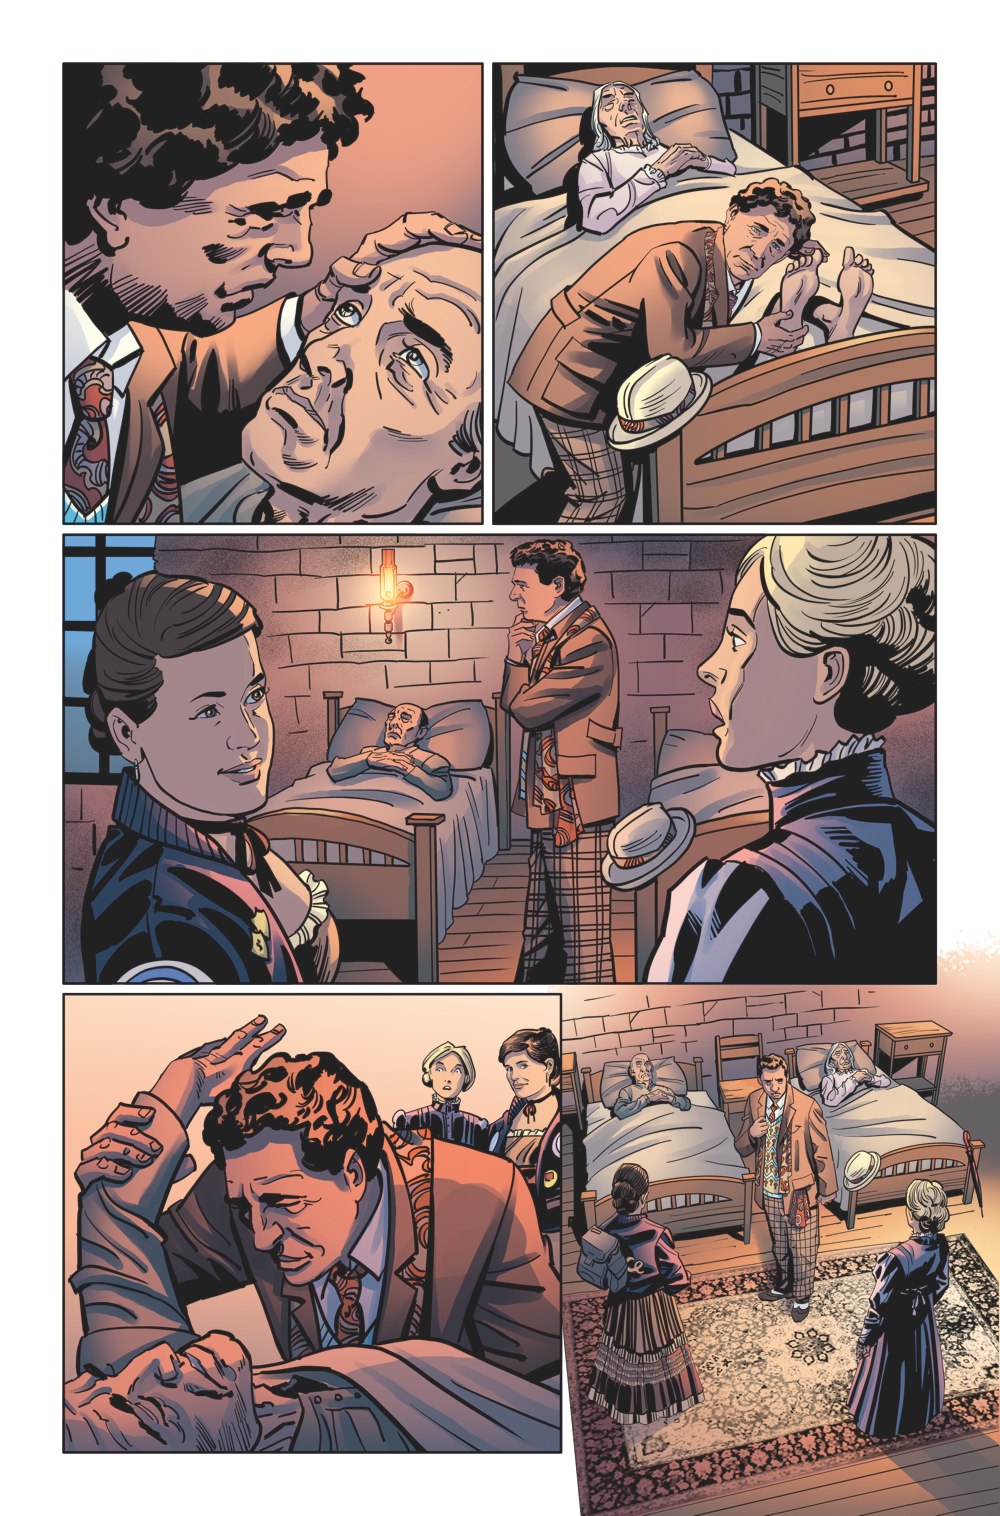 Doctor Who: Prisoners of Time #7 interior art by Kev Hopgood